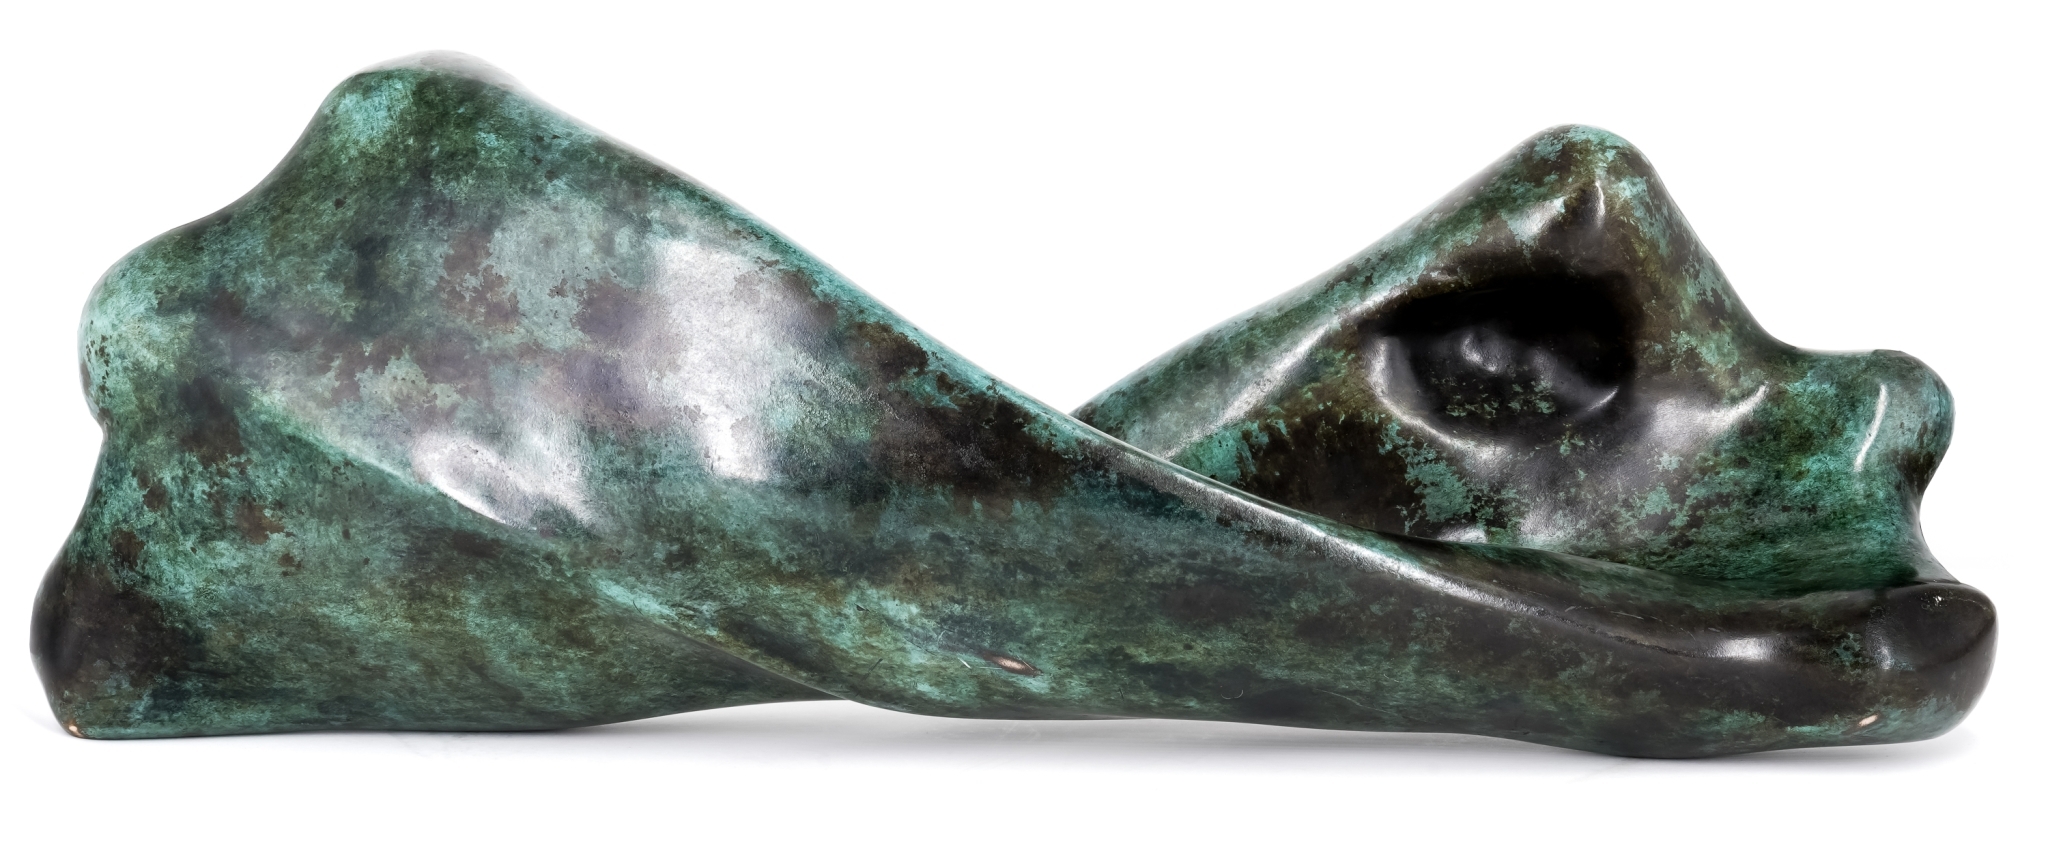 MARZIA COLONNA (ITALIAN b. 1951): A GREEN PATINATED BRONZE 'TWISTED TORSO' Signed to the cast 'Colonna 4/12'  50cm long £600-800